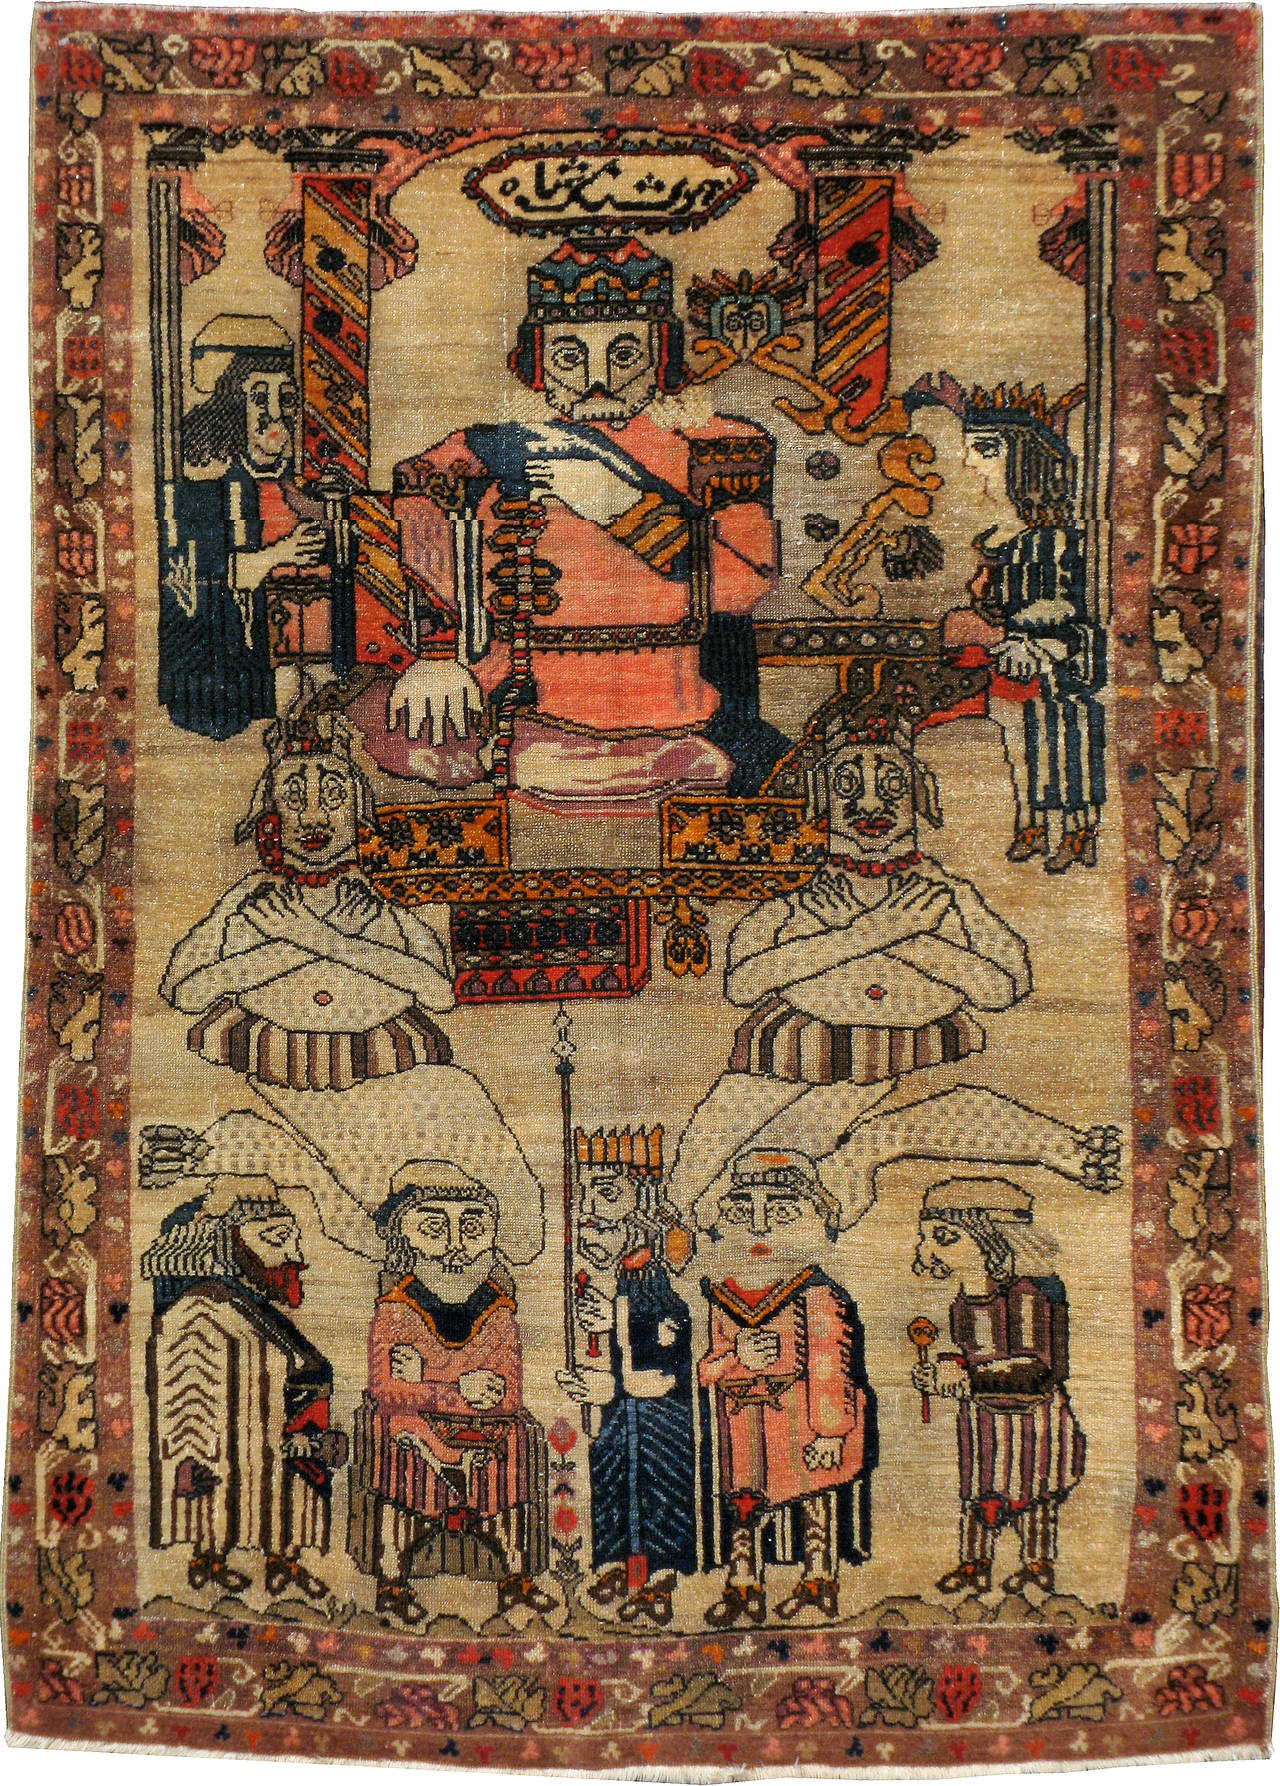 An antique Persian, Malayer, pictorial carpet from the turn of the 20th century.